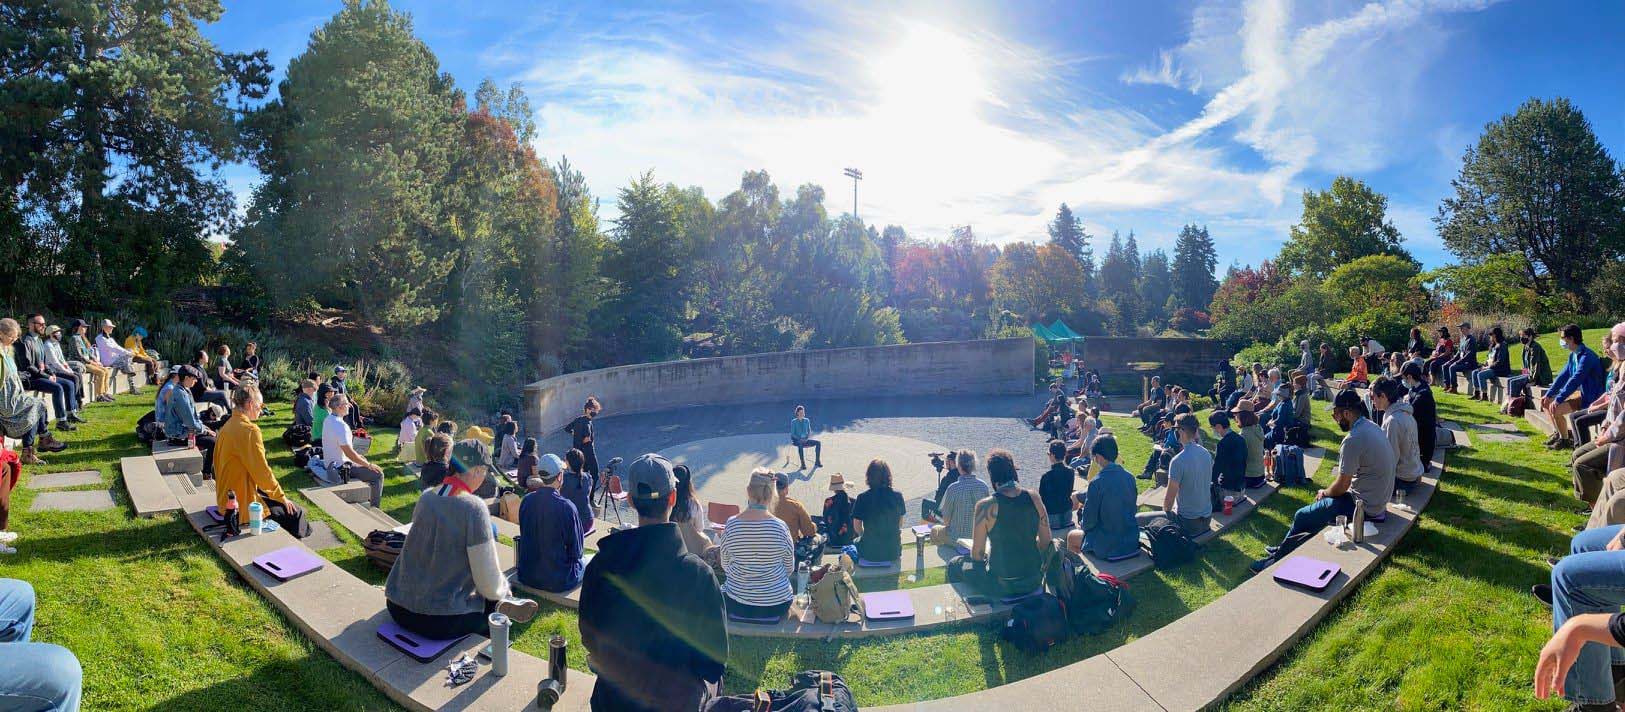 On a sunny day, a large group of people sit around an open-air amphitheatre